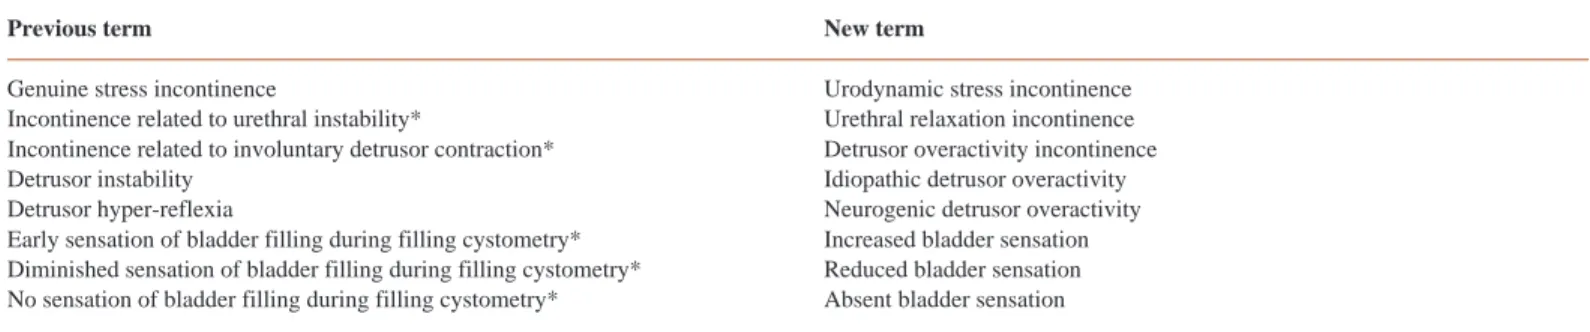 Table 4. Standardized Terminology for Signs Suggestive of Lower Urinary Tract Dysfunction (LUTD) as Approved by the ICS in 2002 [7] Urinary incontinence urine leakage seen during examination: this may be urethral or extraurethral